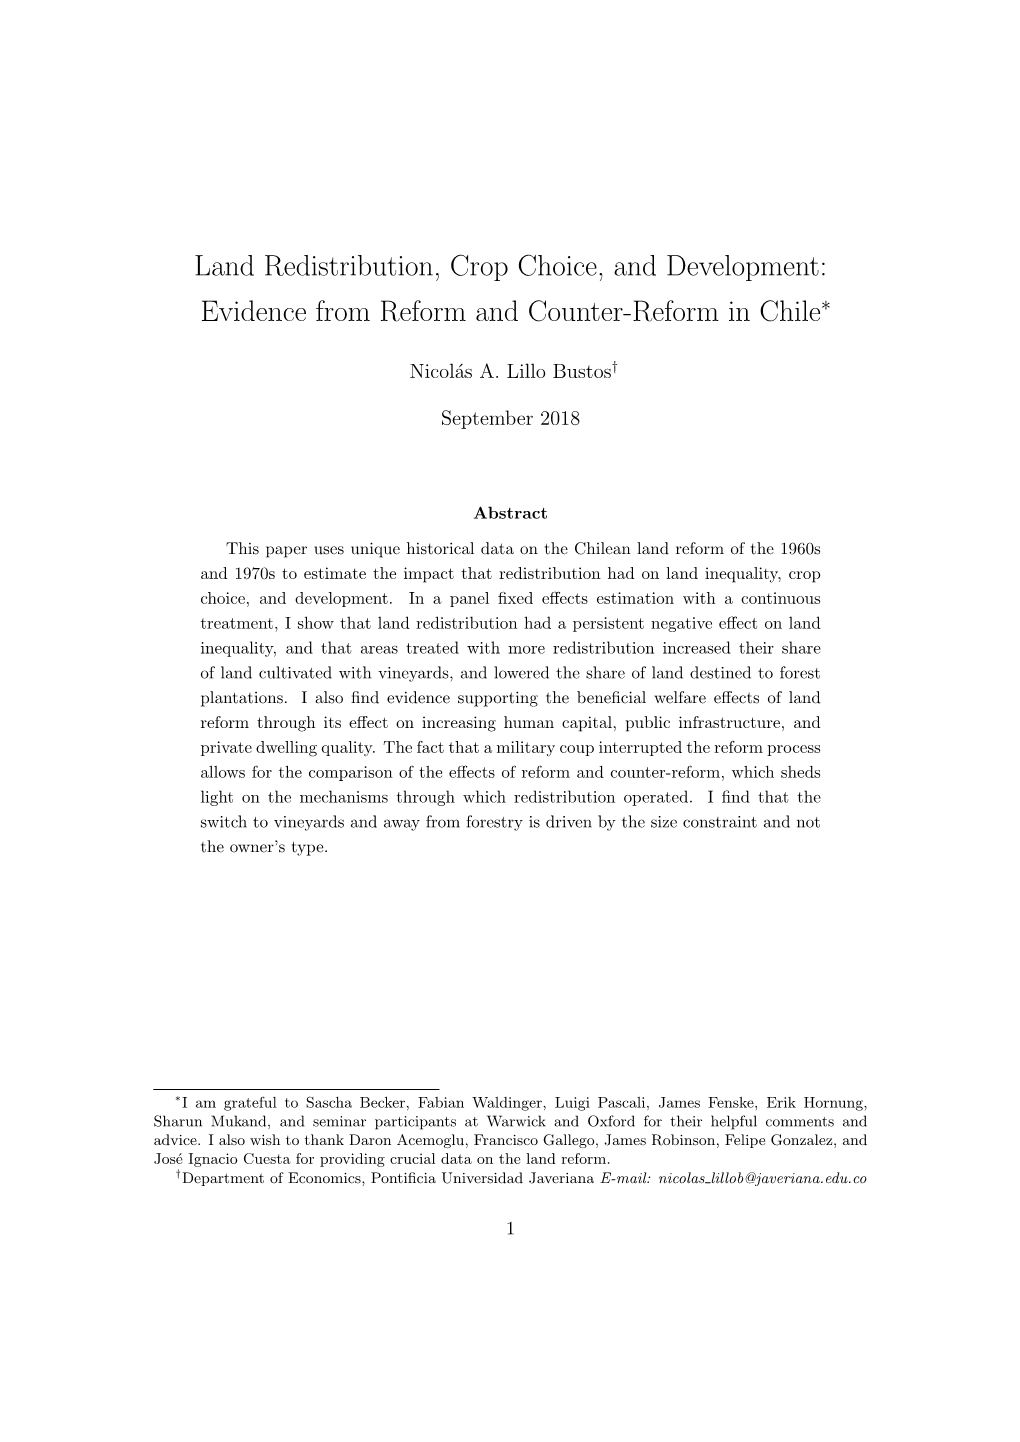 Land Redistribution and Crop Choice